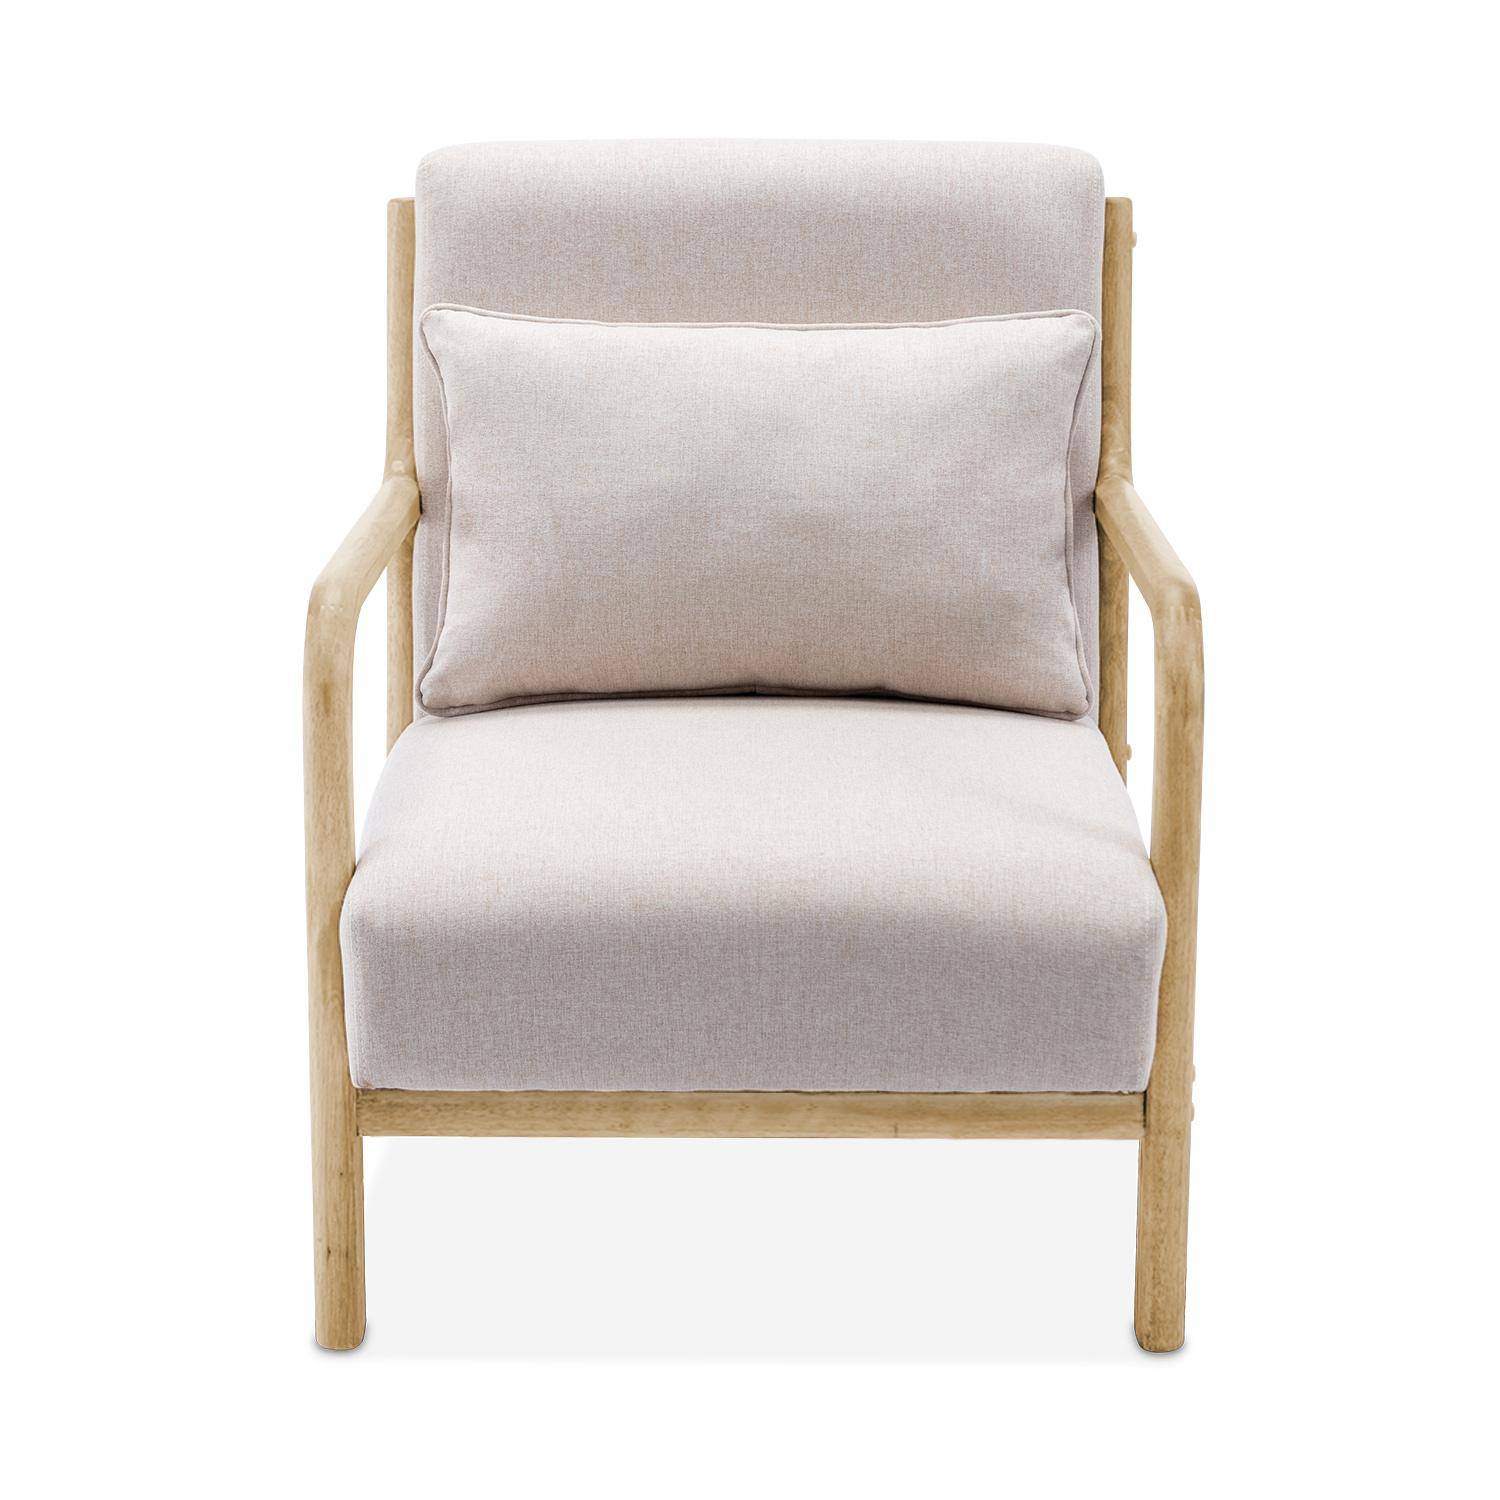 Wooden armchair with scandi-style compass legs and cushion - Lorens - Beige,sweeek,Photo5